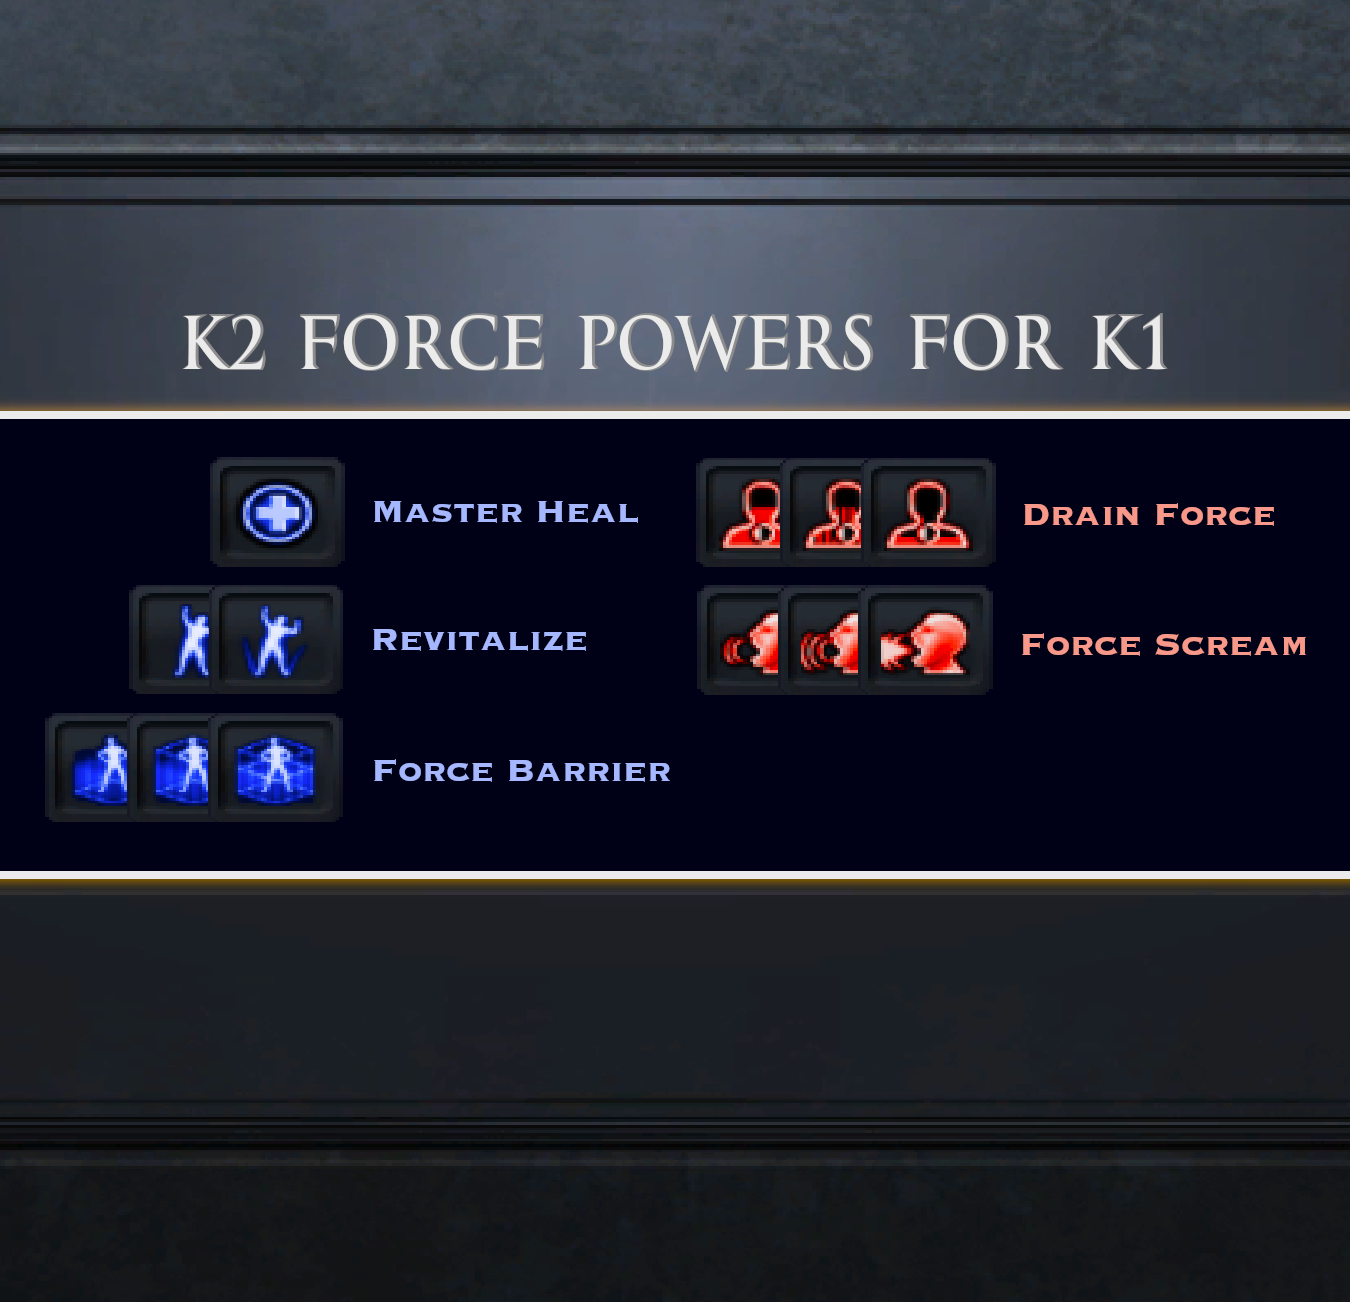 K2 Force Powers for K1